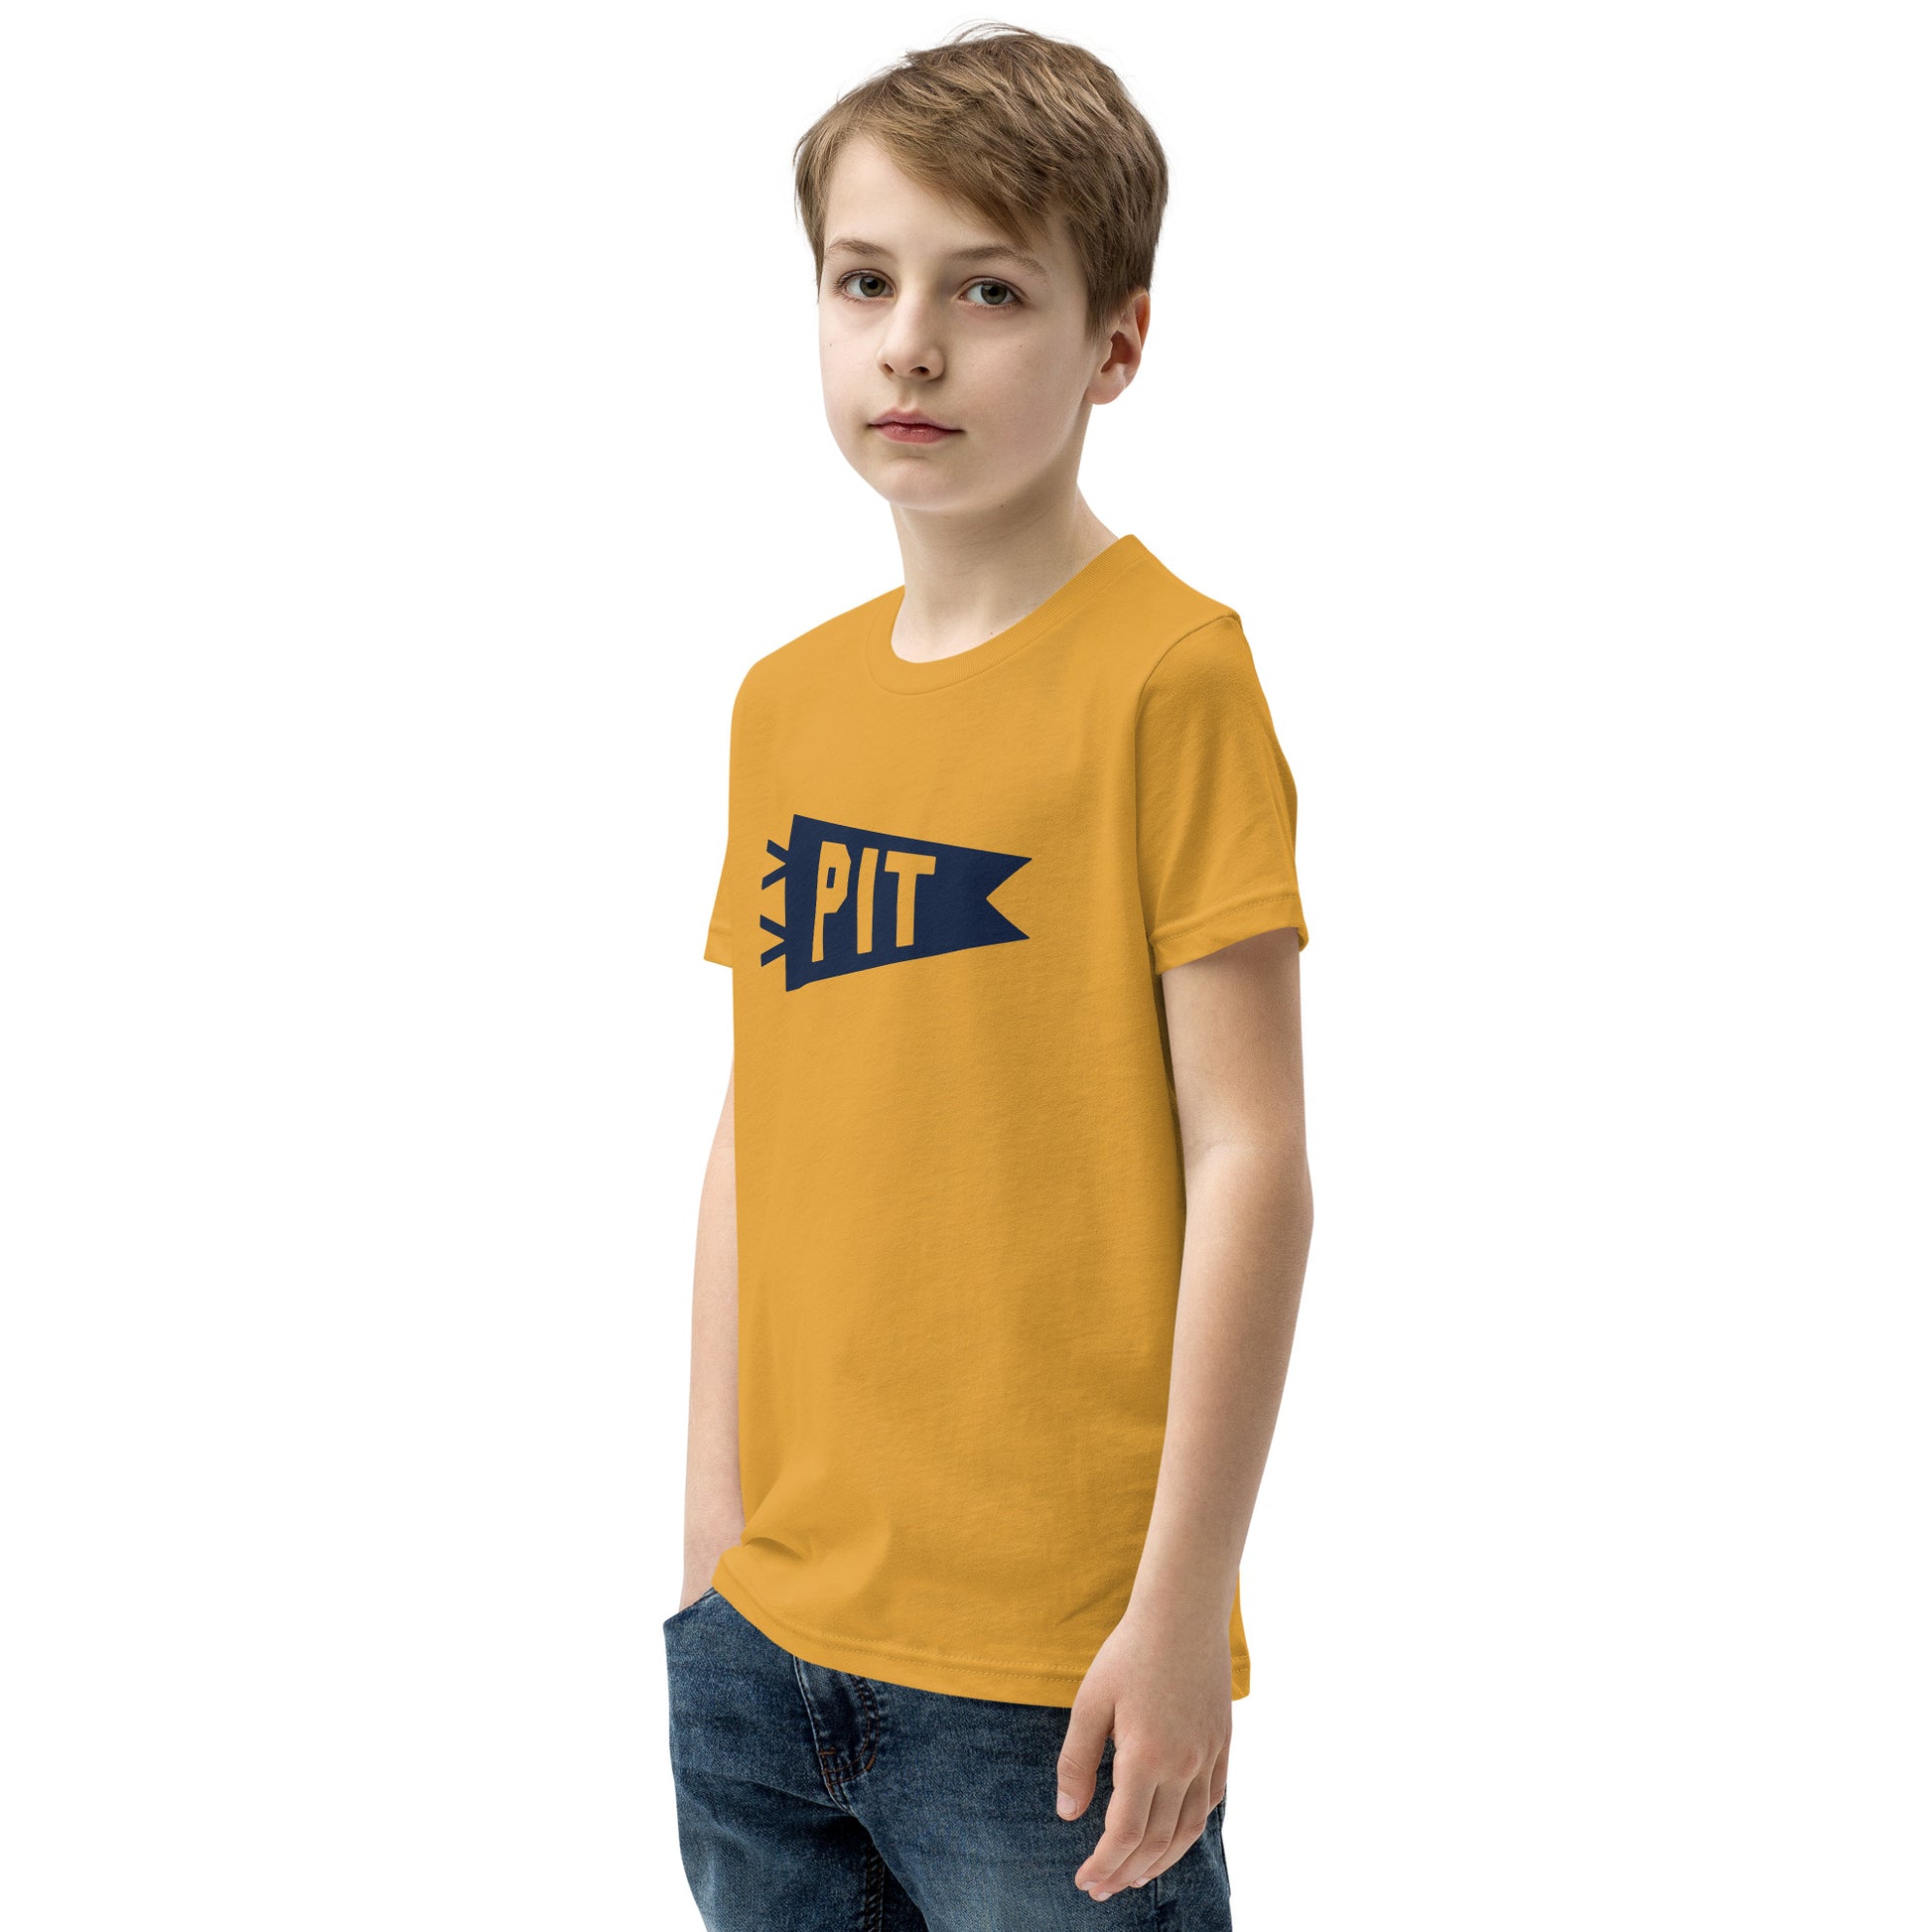 Kid's Airport Code Tee - Navy Blue Graphic • PIT Pittsburgh • YHM Designs - Image 06